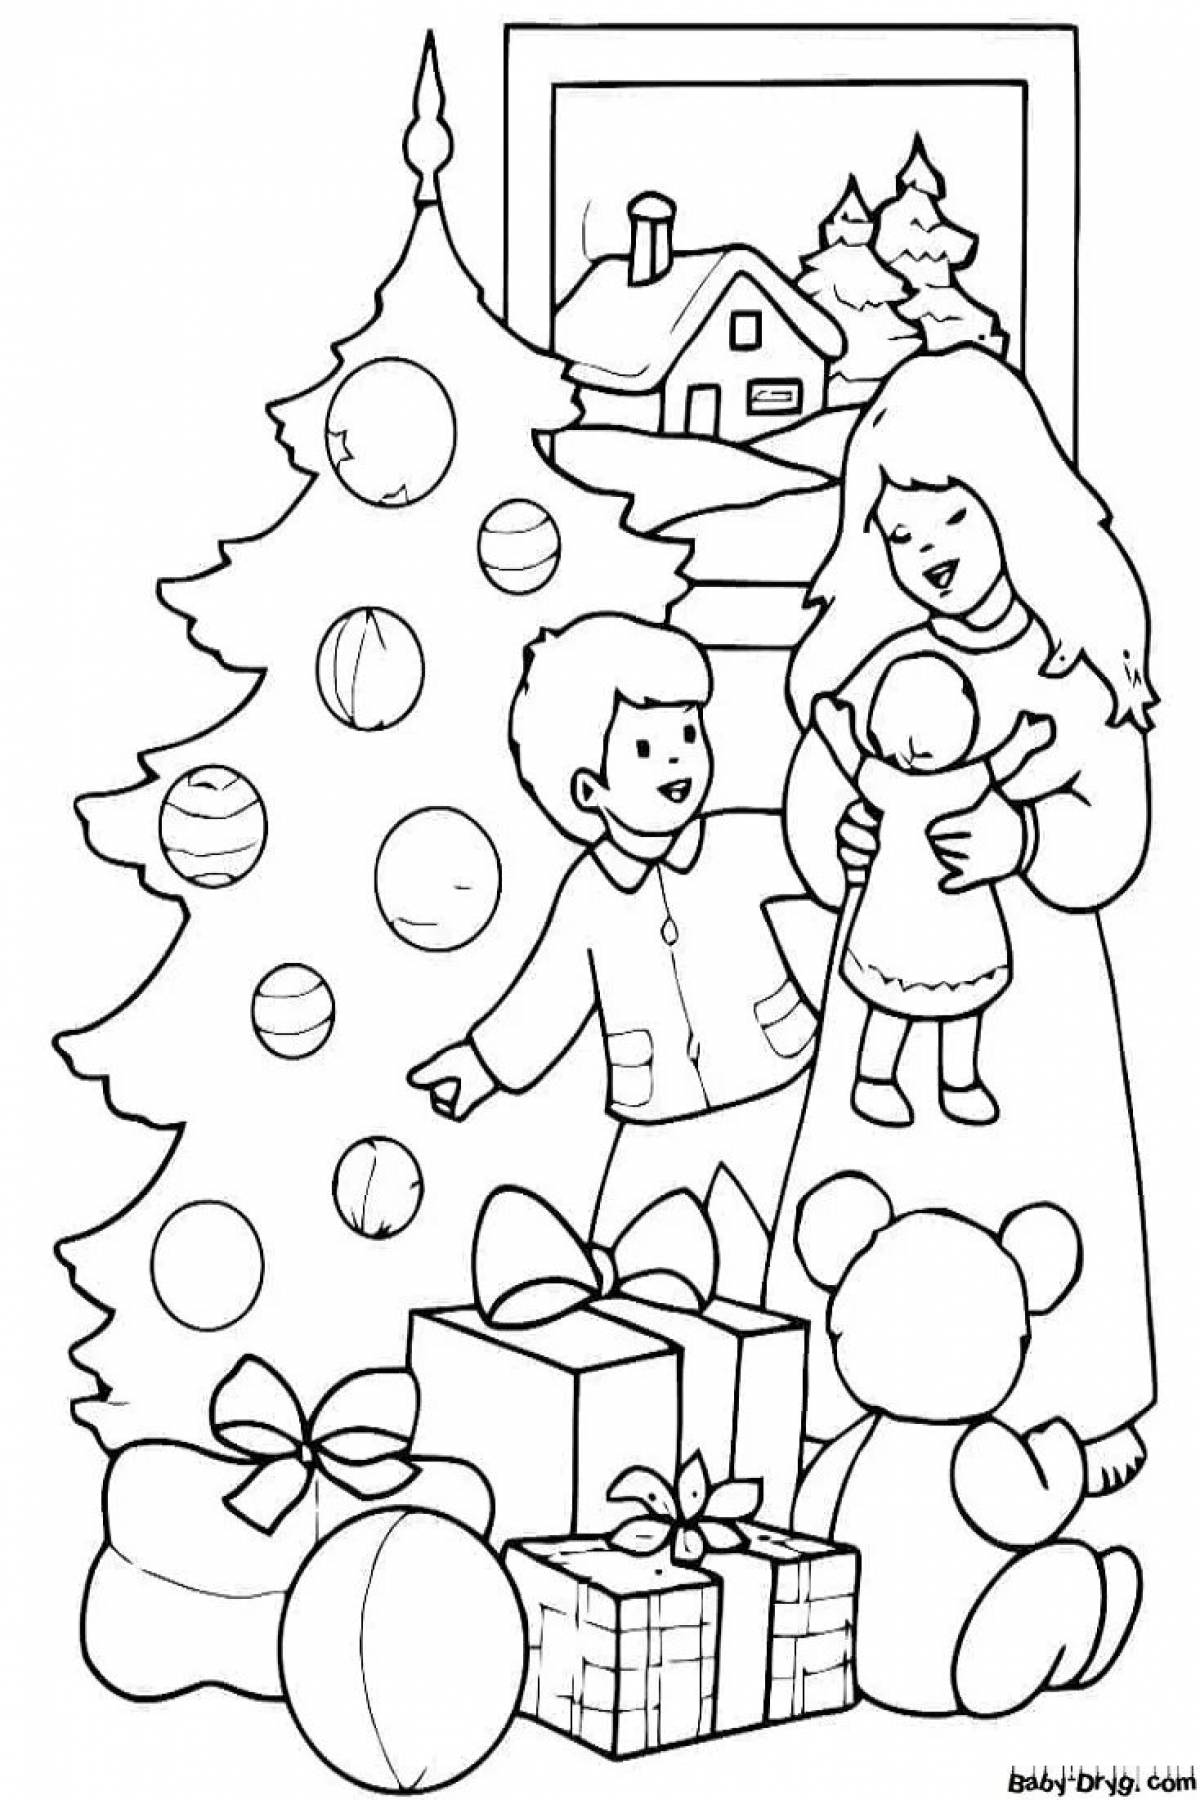 Majestic Christmas miracle coloring book